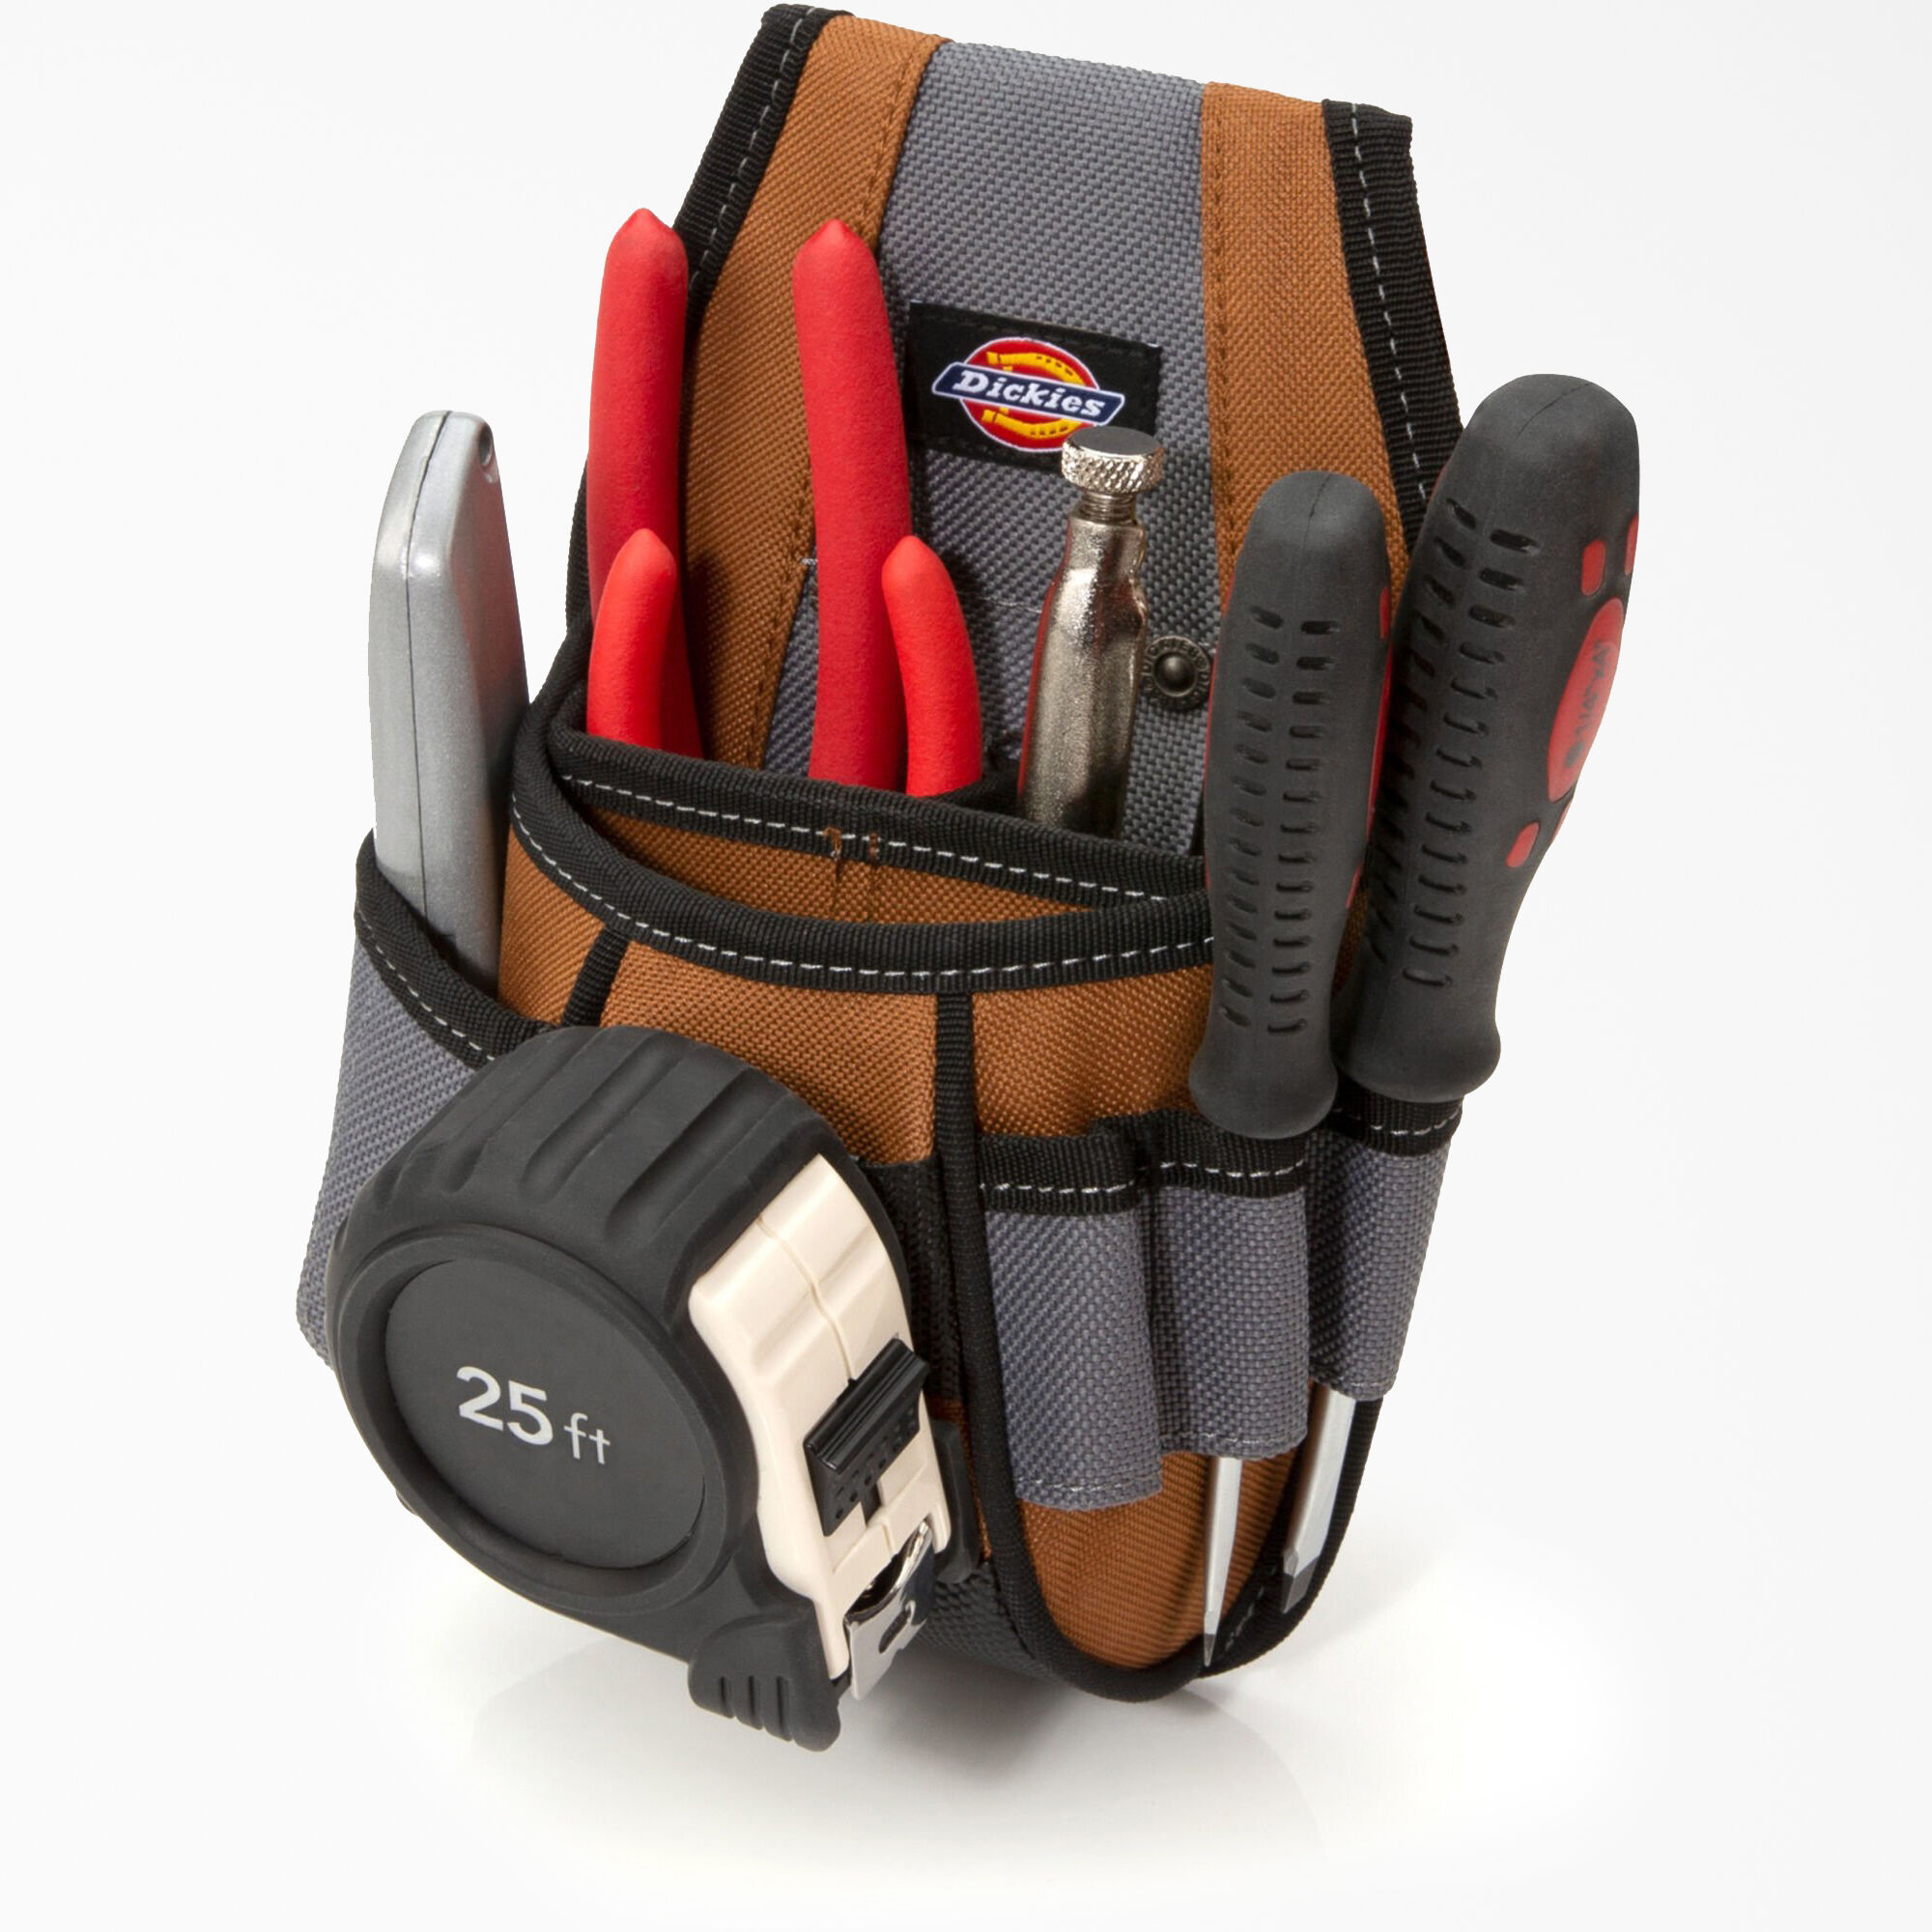 Dickies 57101 Rigid Nail/Screw Tool Belt Pouch with Tape Measure Clip 